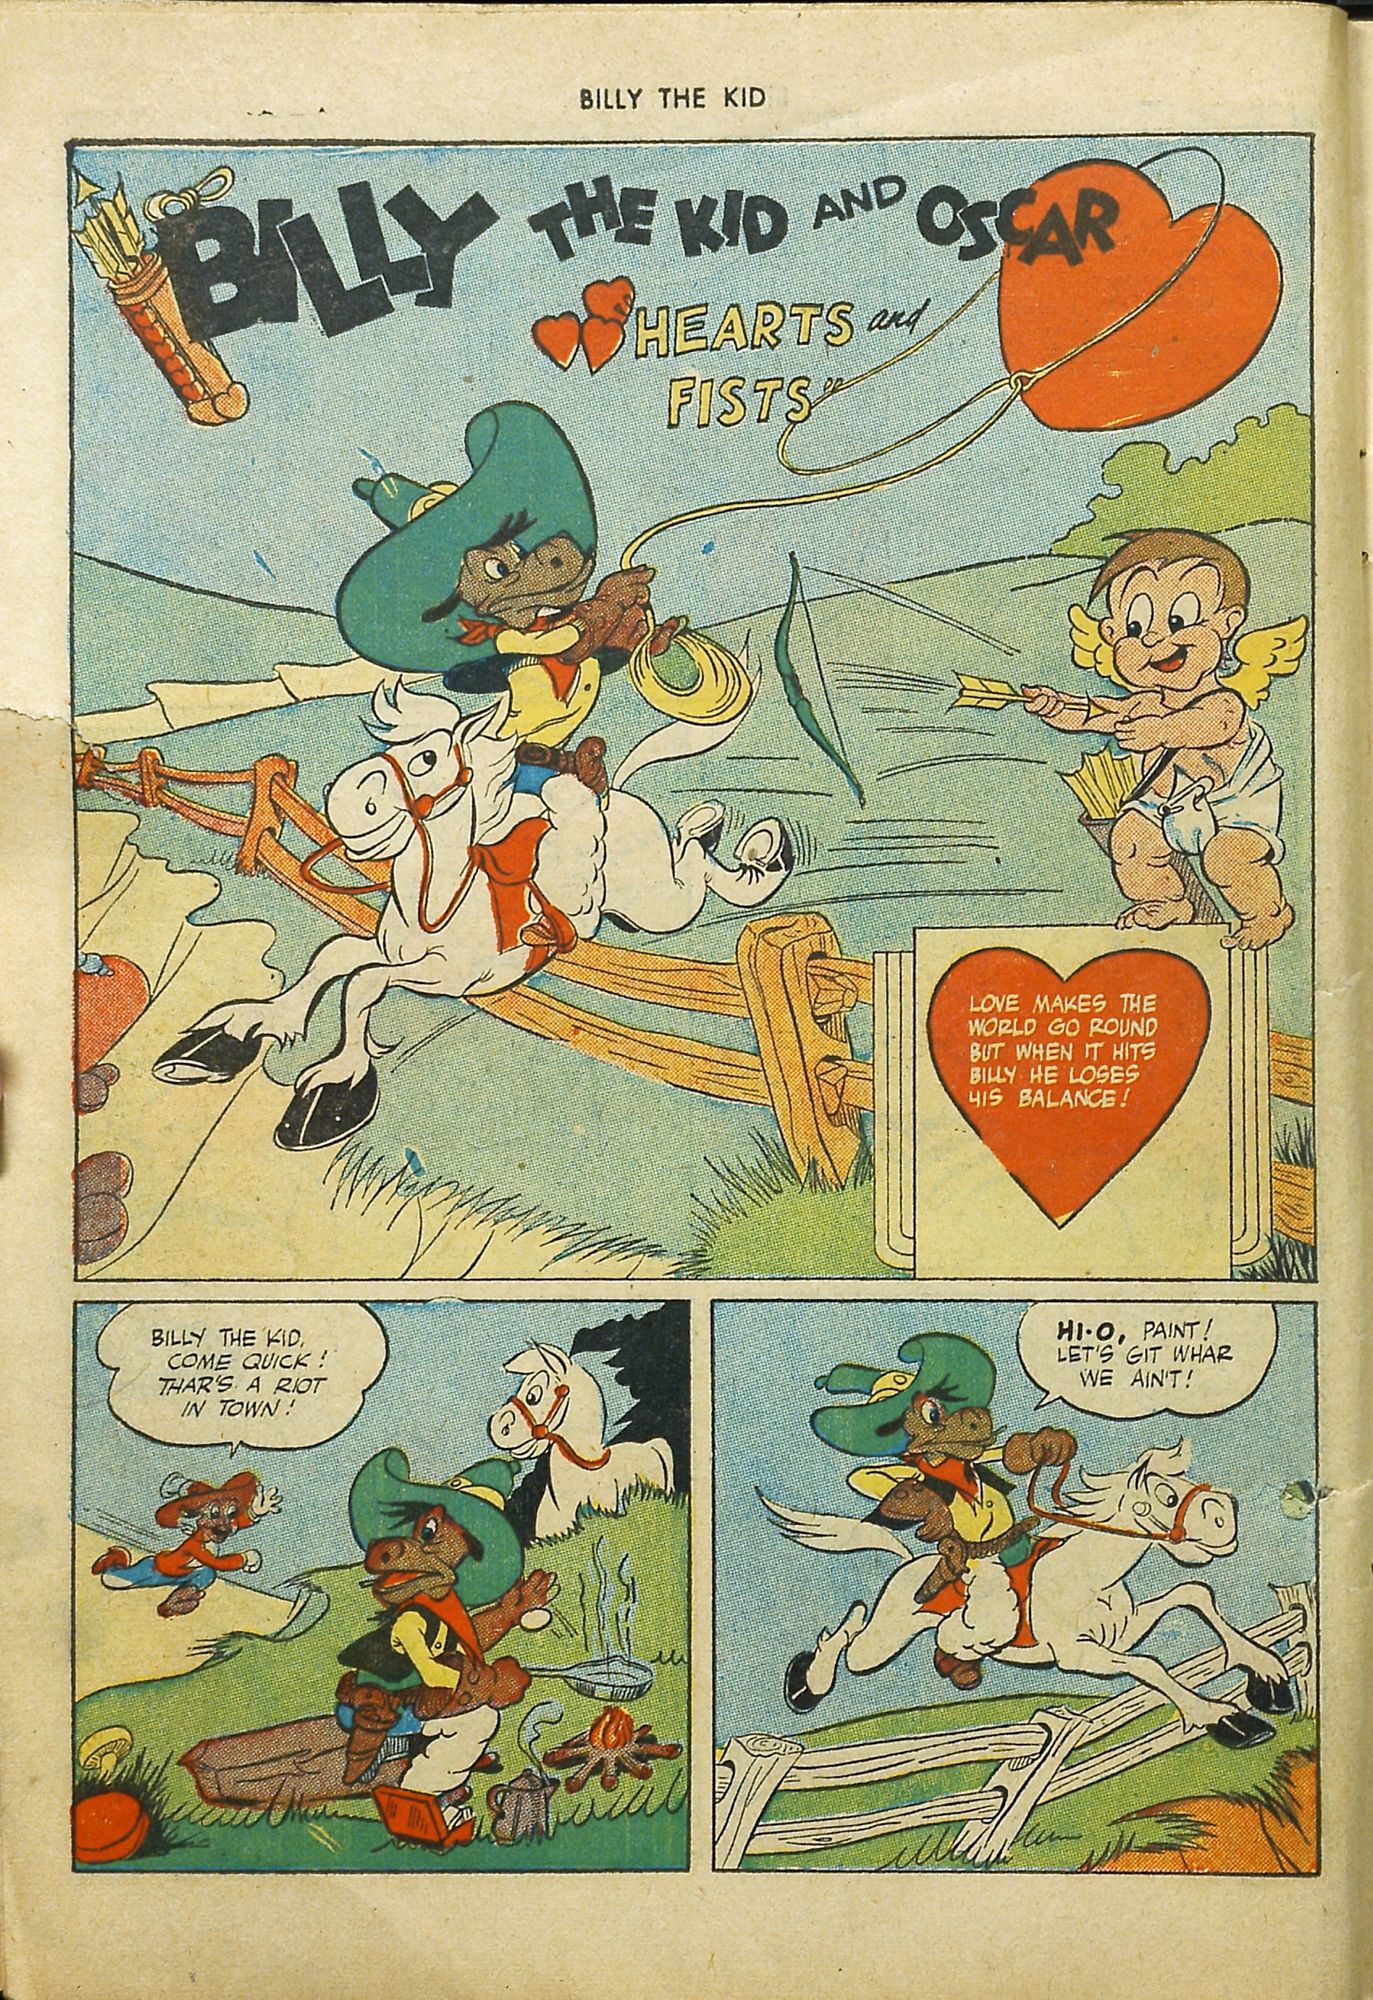 Read online Billy the Kid and Oscar comic -  Issue #3 - 14